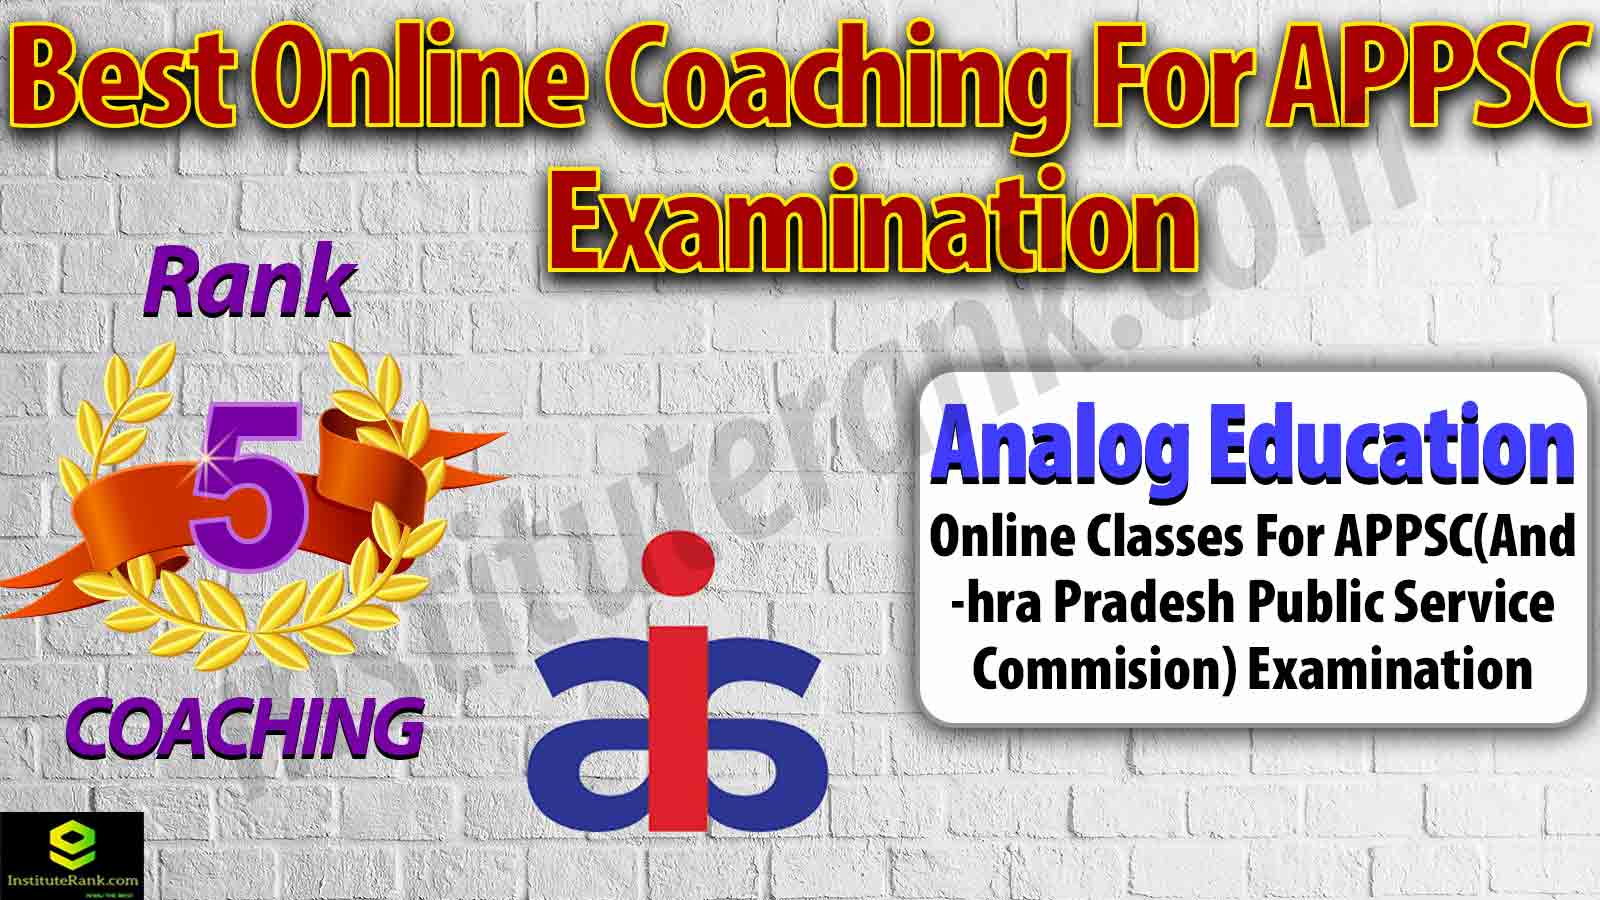 Top Online Coaching Preparation for APPSC Examination